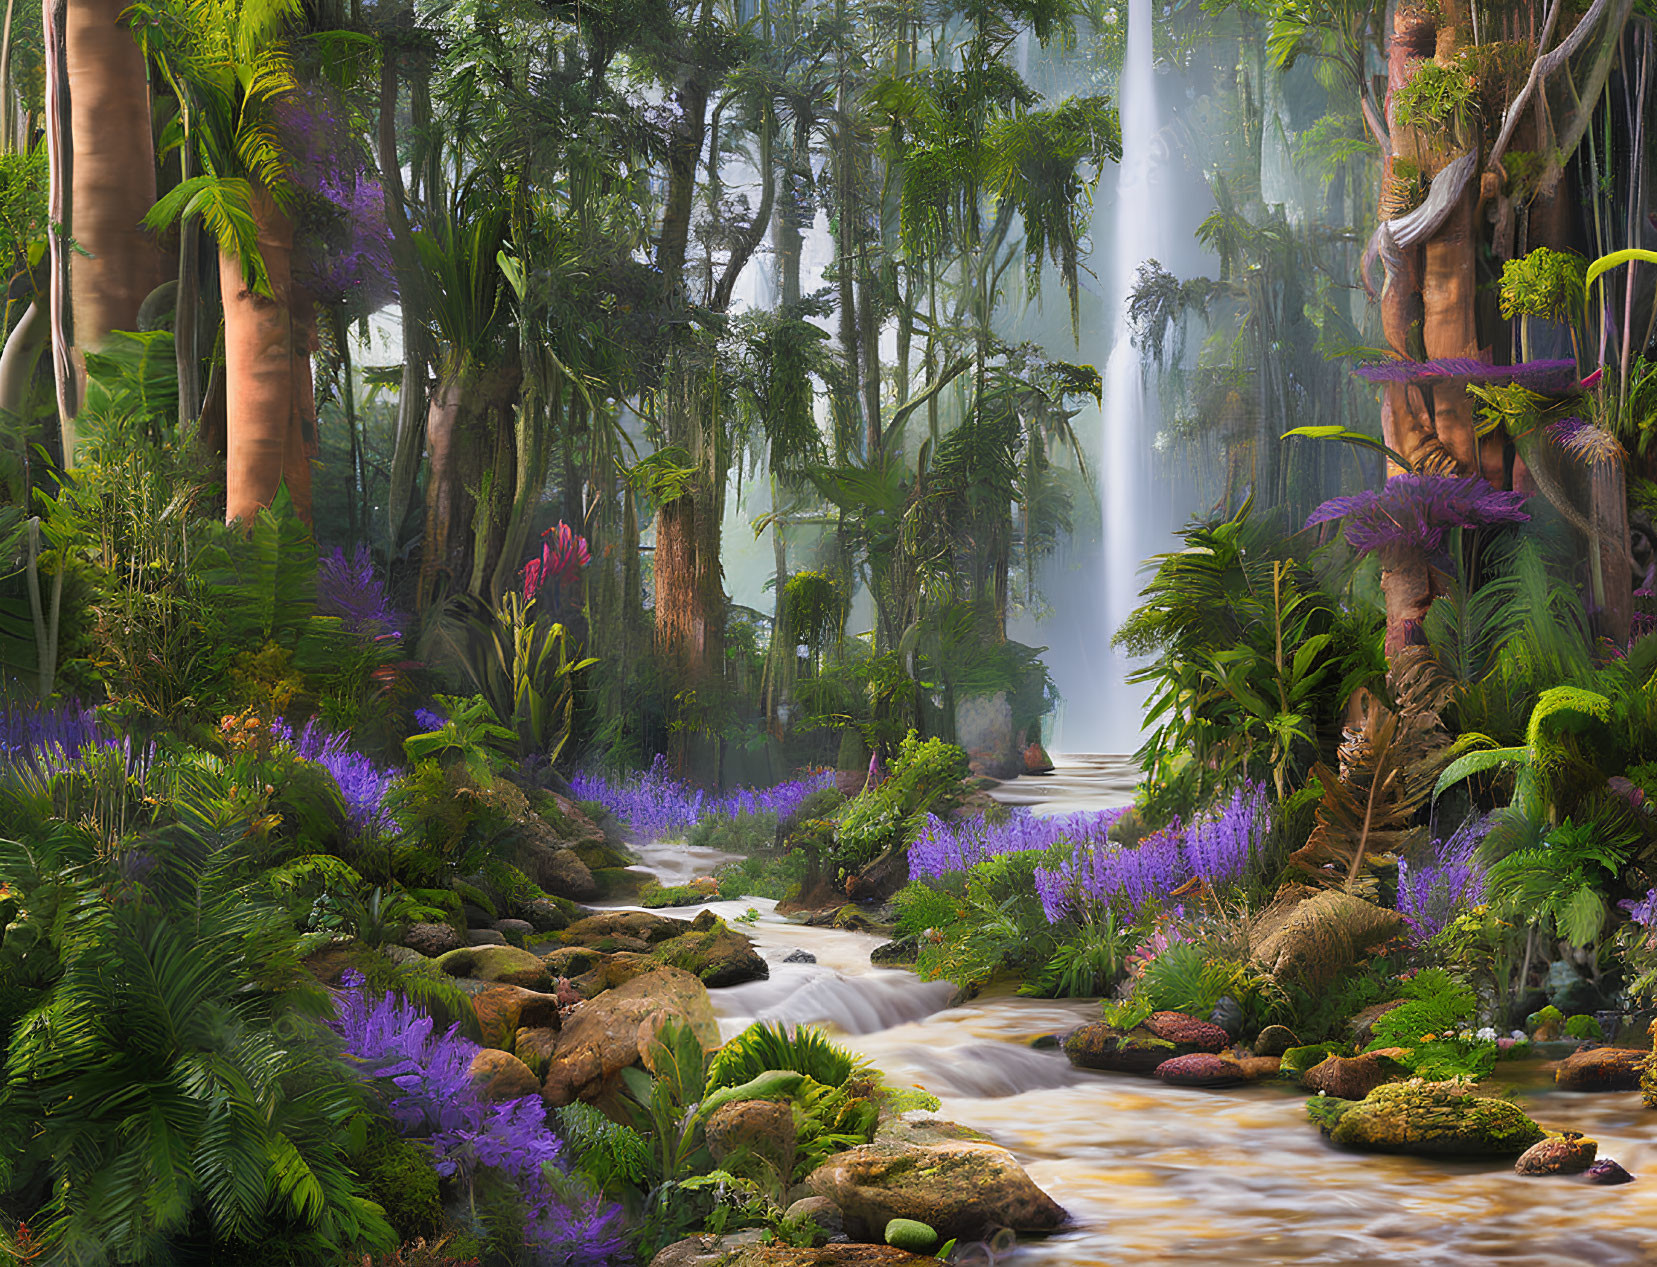 Tranquil forest scene with waterfall, stream, purple flowers, moss-covered rocks, and misty